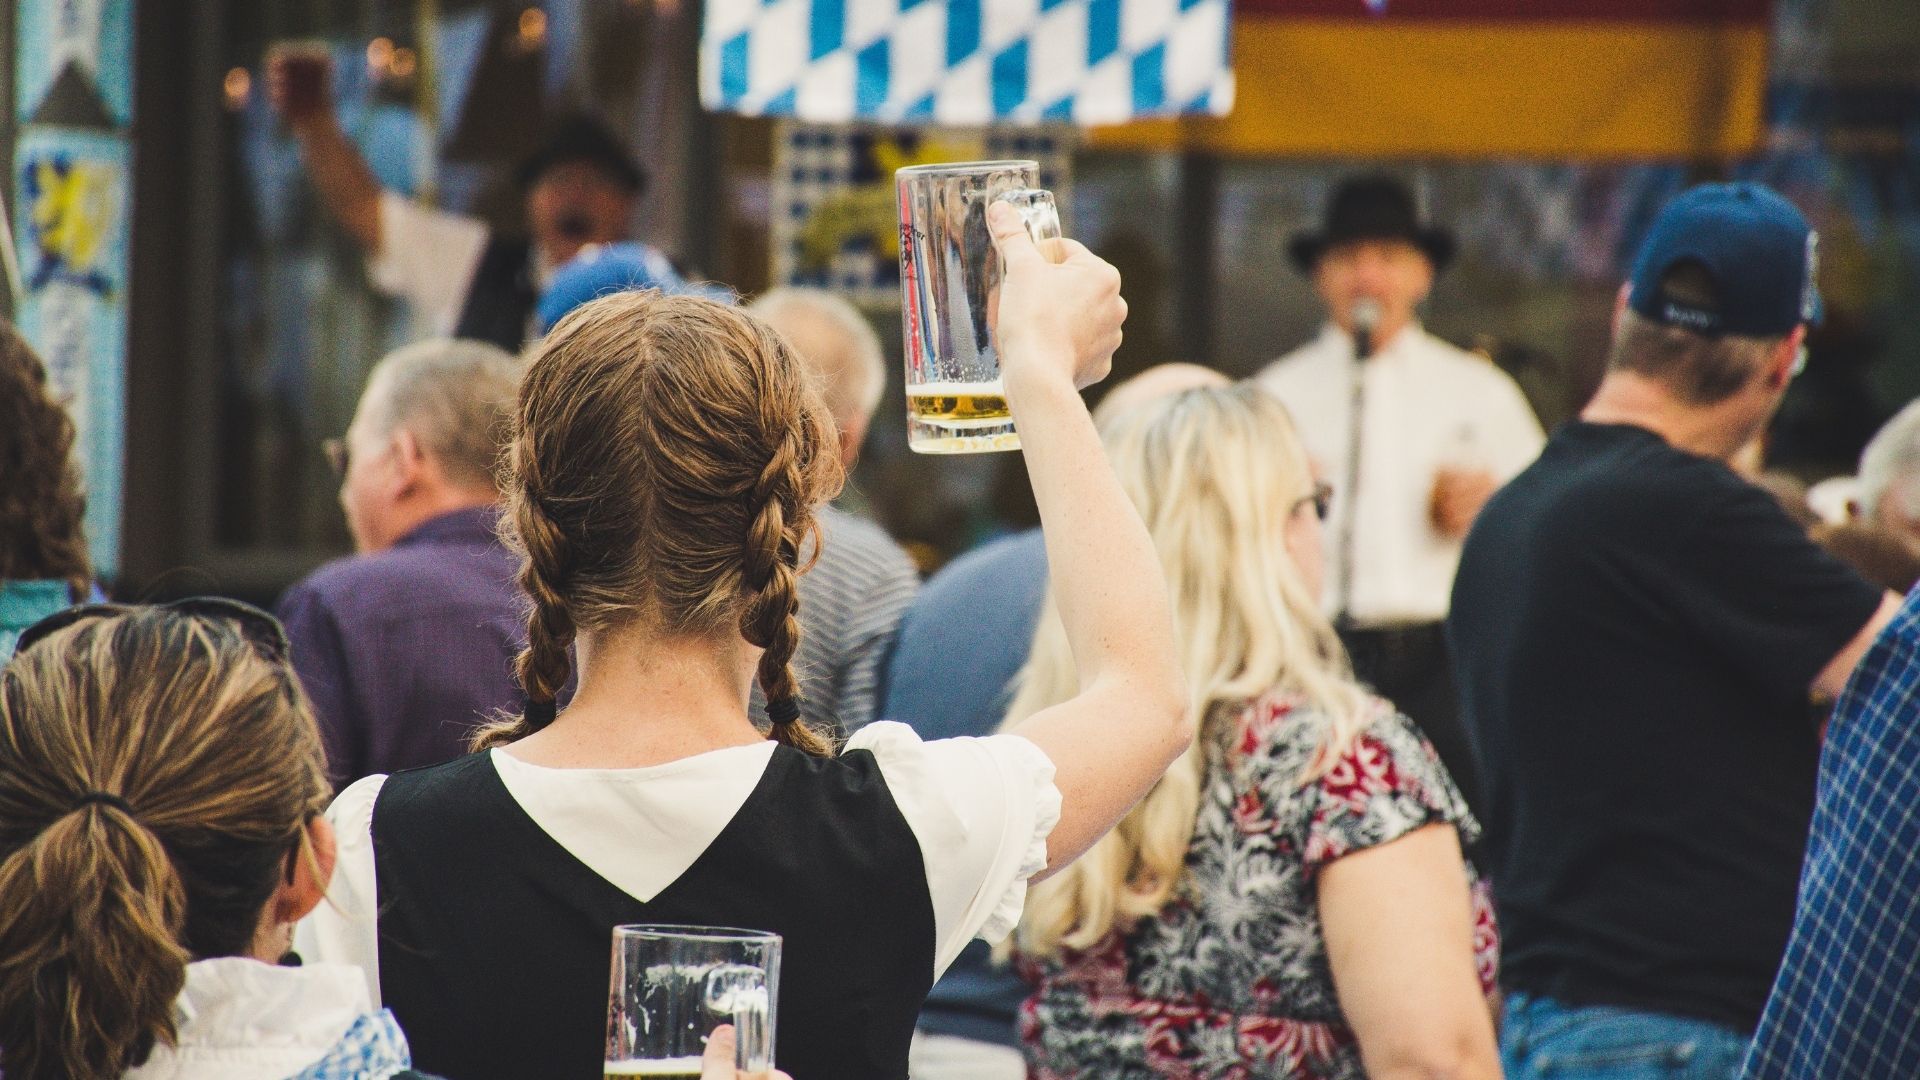 Bavaria: Oktoberfest and beyond – Backpack full of questions